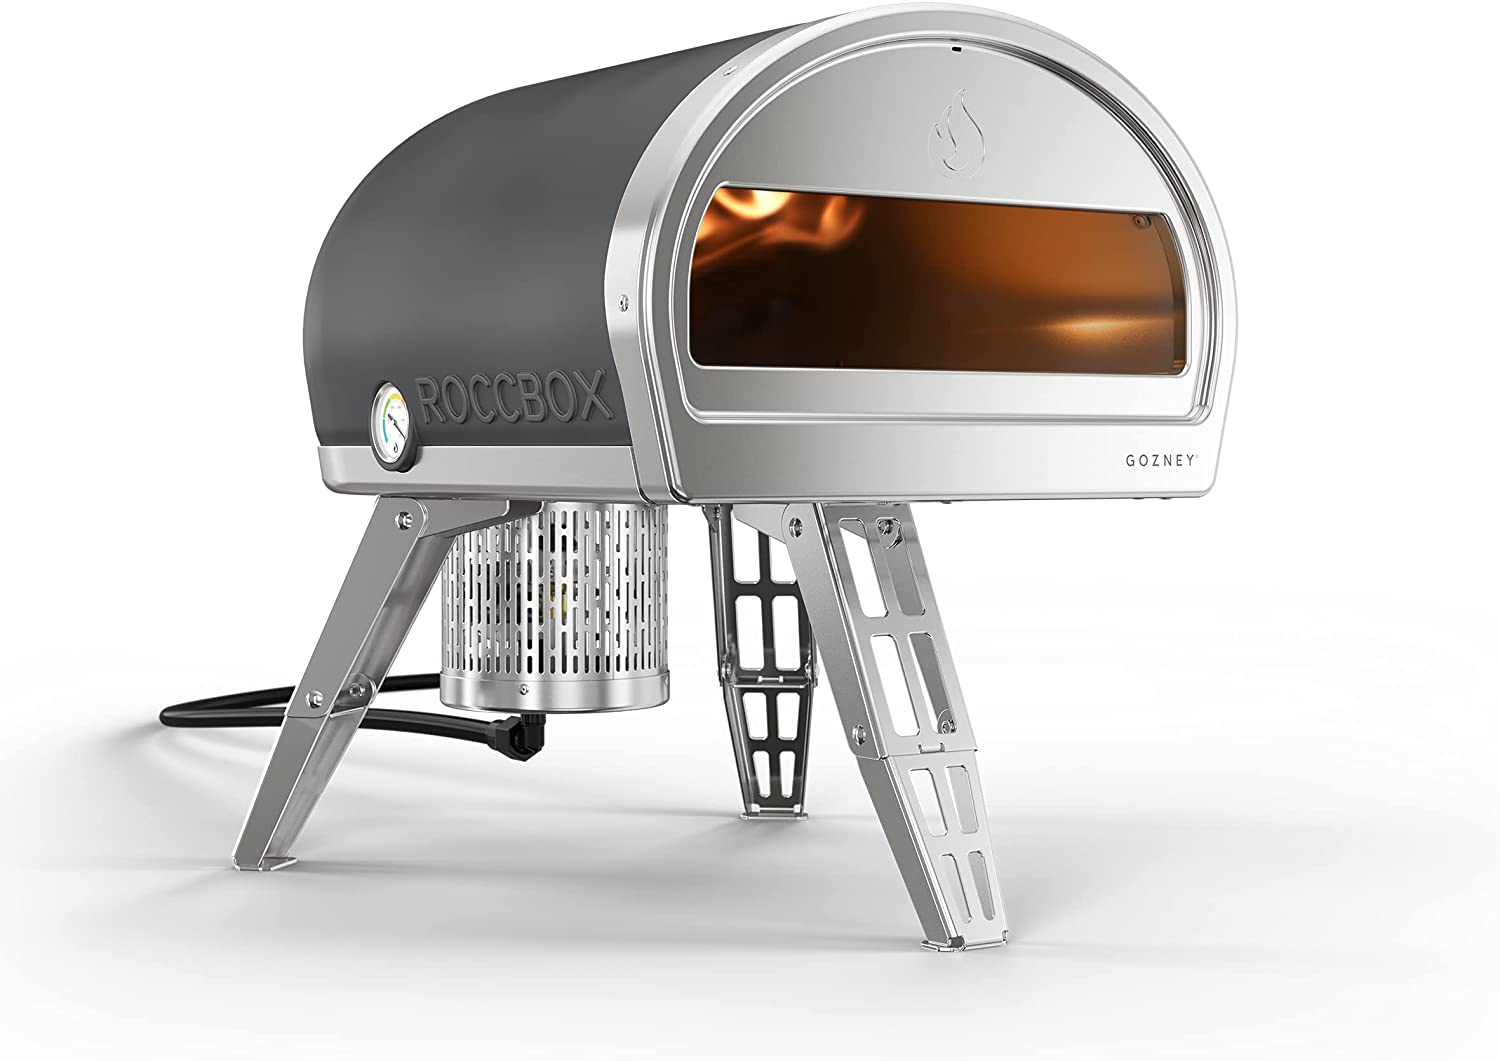 Roccbox Gozney Portable Outdoor Pizza Oven - Includes Professional Grade Pizza Peel, Built-in Thermometer and Safe Touch Silicone Jacket - Propane Gas Fired, with Rolling Wood Flame - (Grey) - image 1 of 7